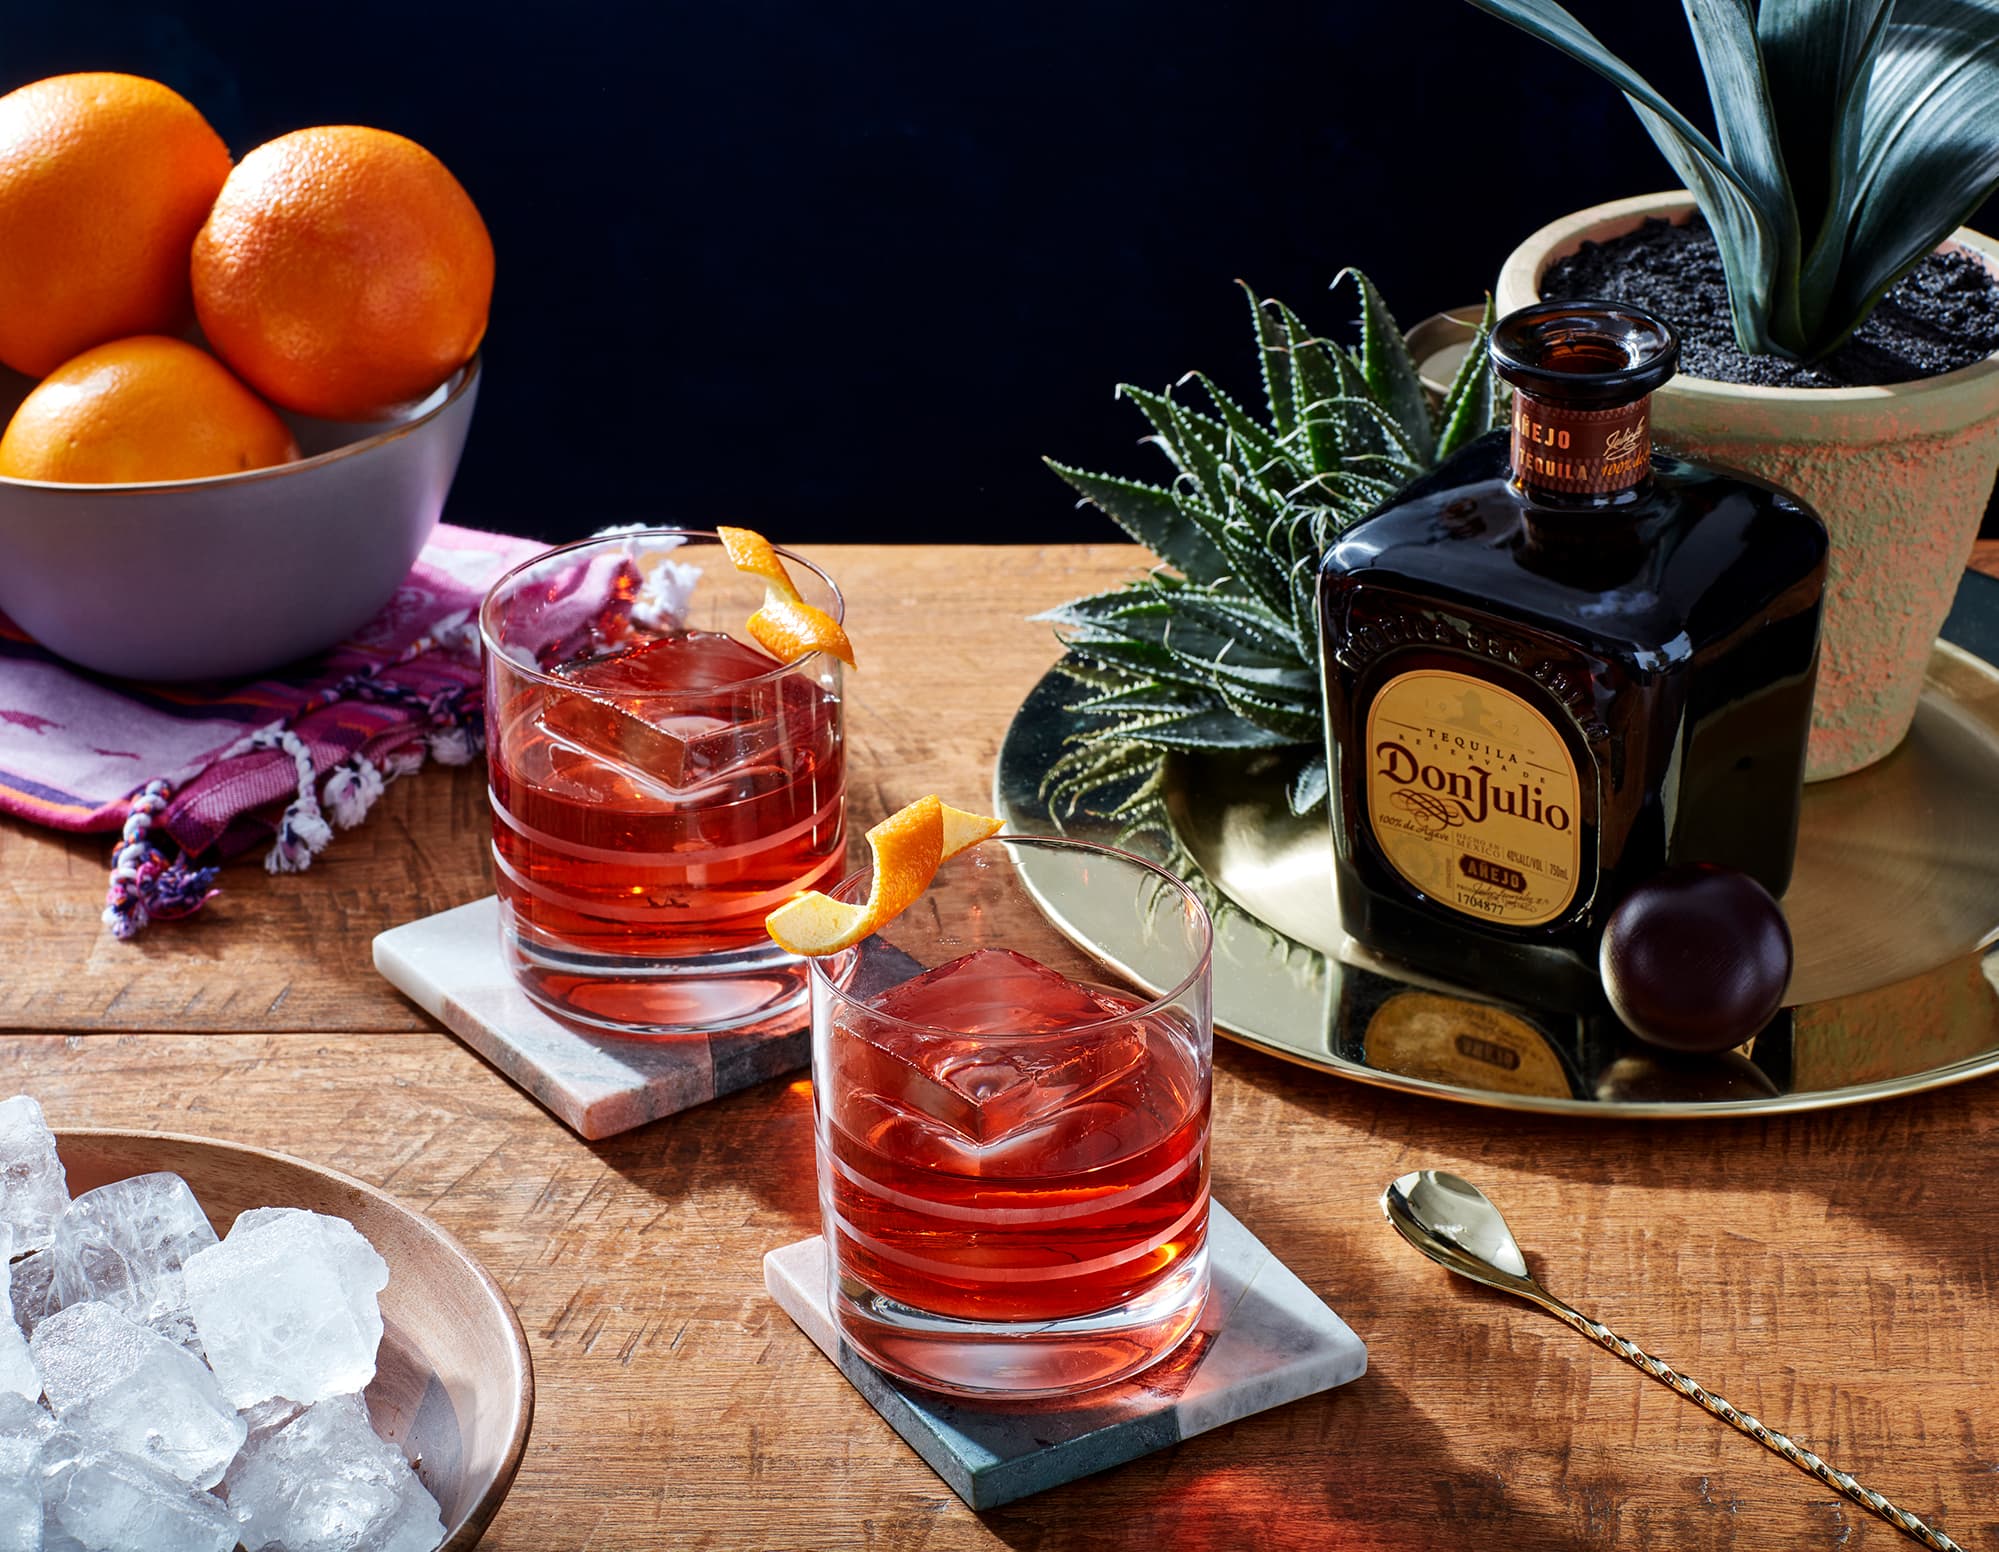 Don Julio Negroni made with Don Julio Añejo Tequila